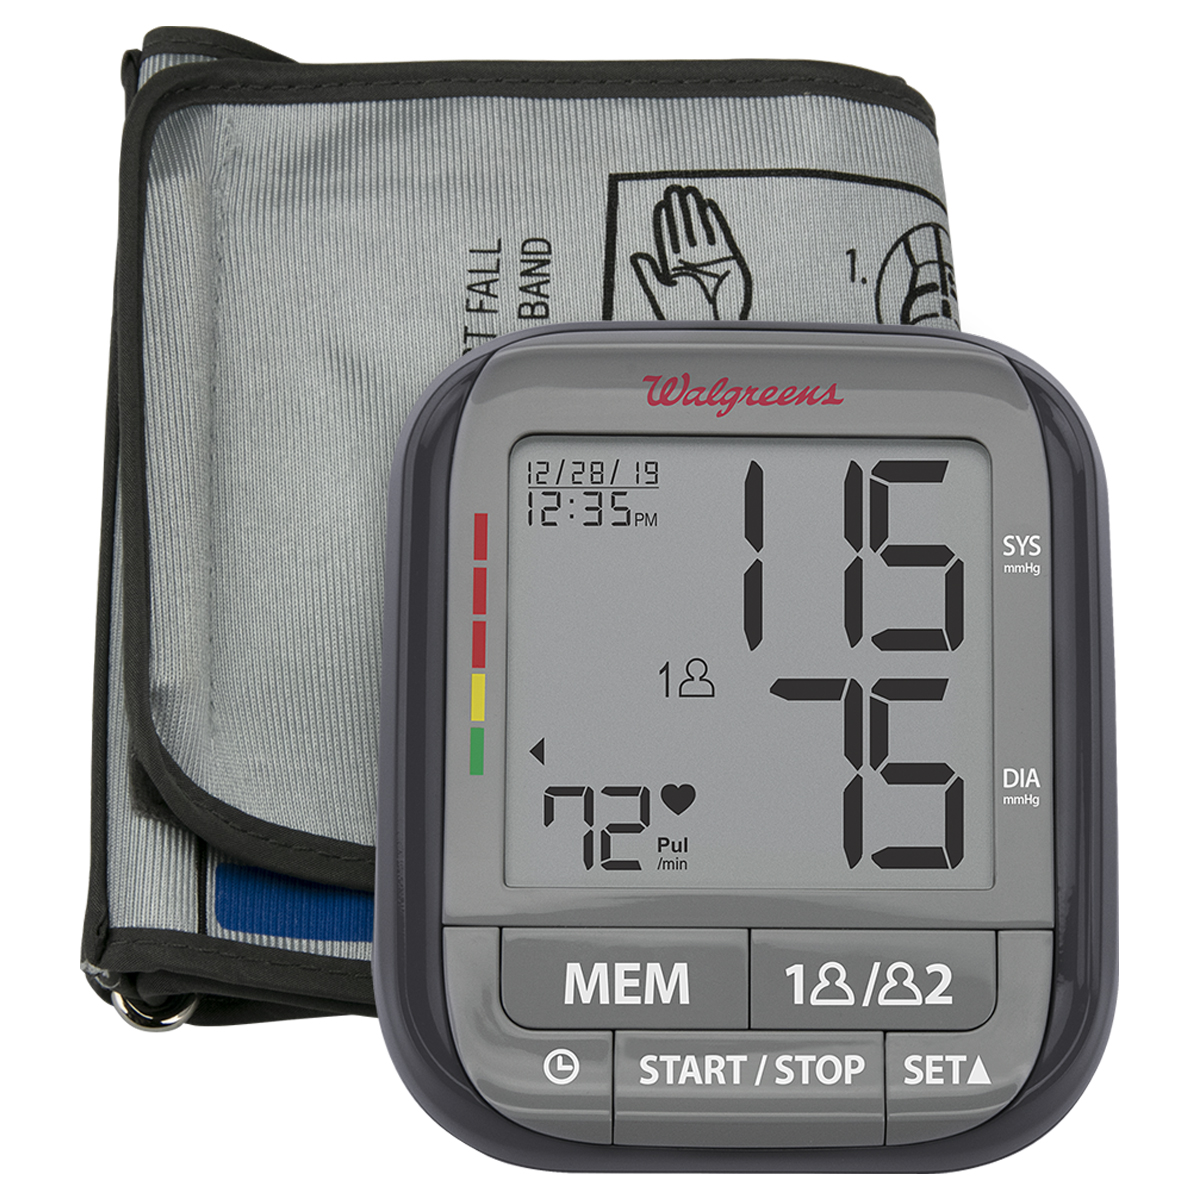 WGNBPA-230 Arm Blood Pressure Monitor package view